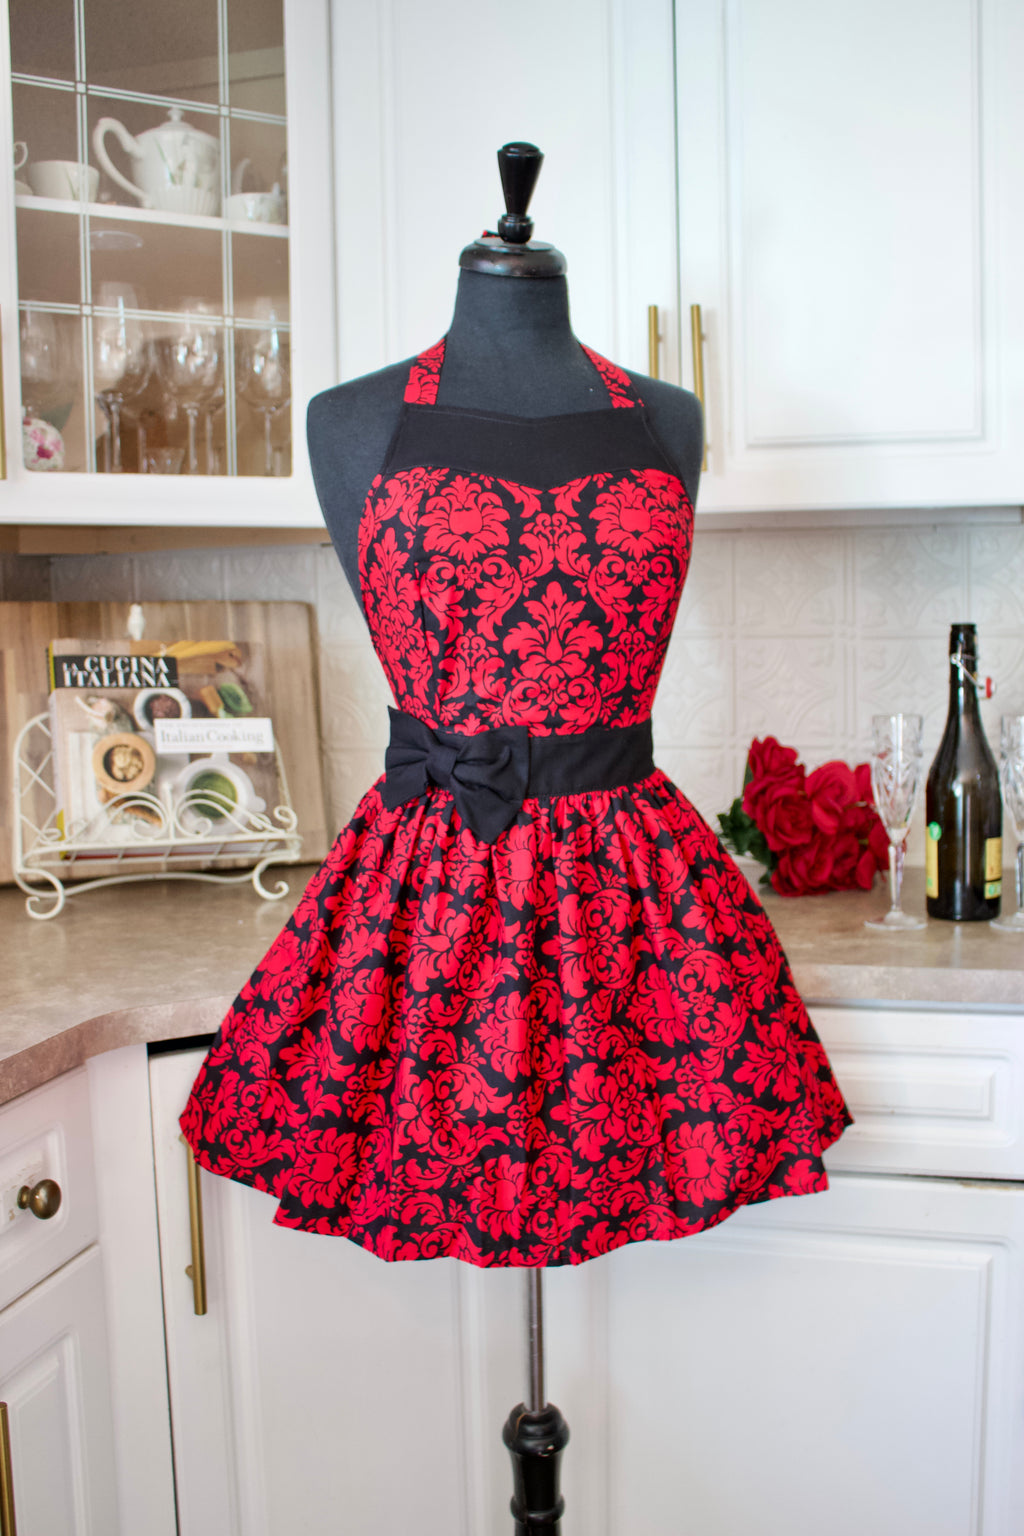 Party Girl ruby red damask apron